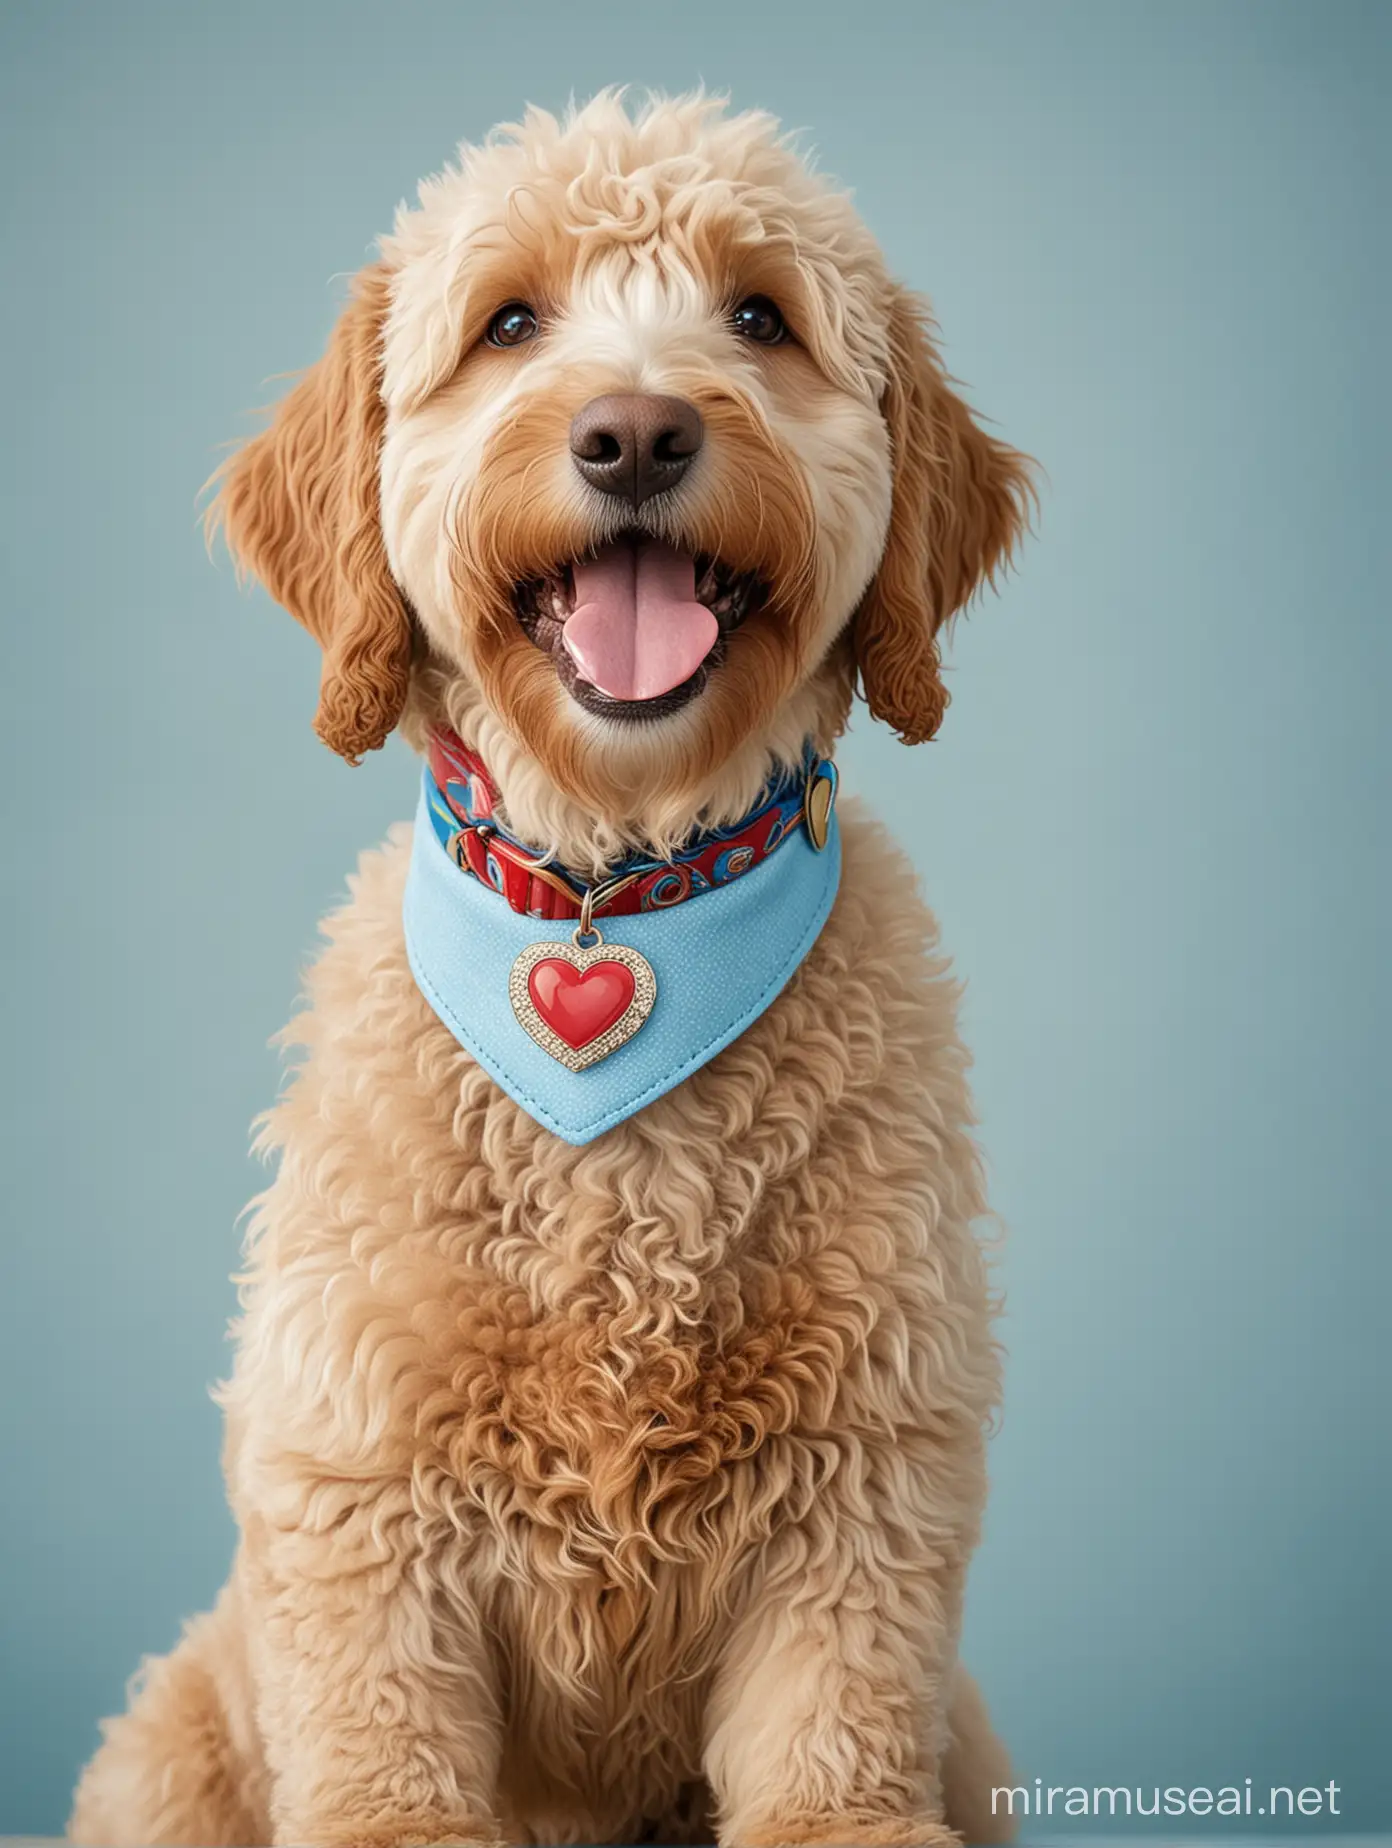 golden doodle dog happy, blue collar with heart pin  background is light blue